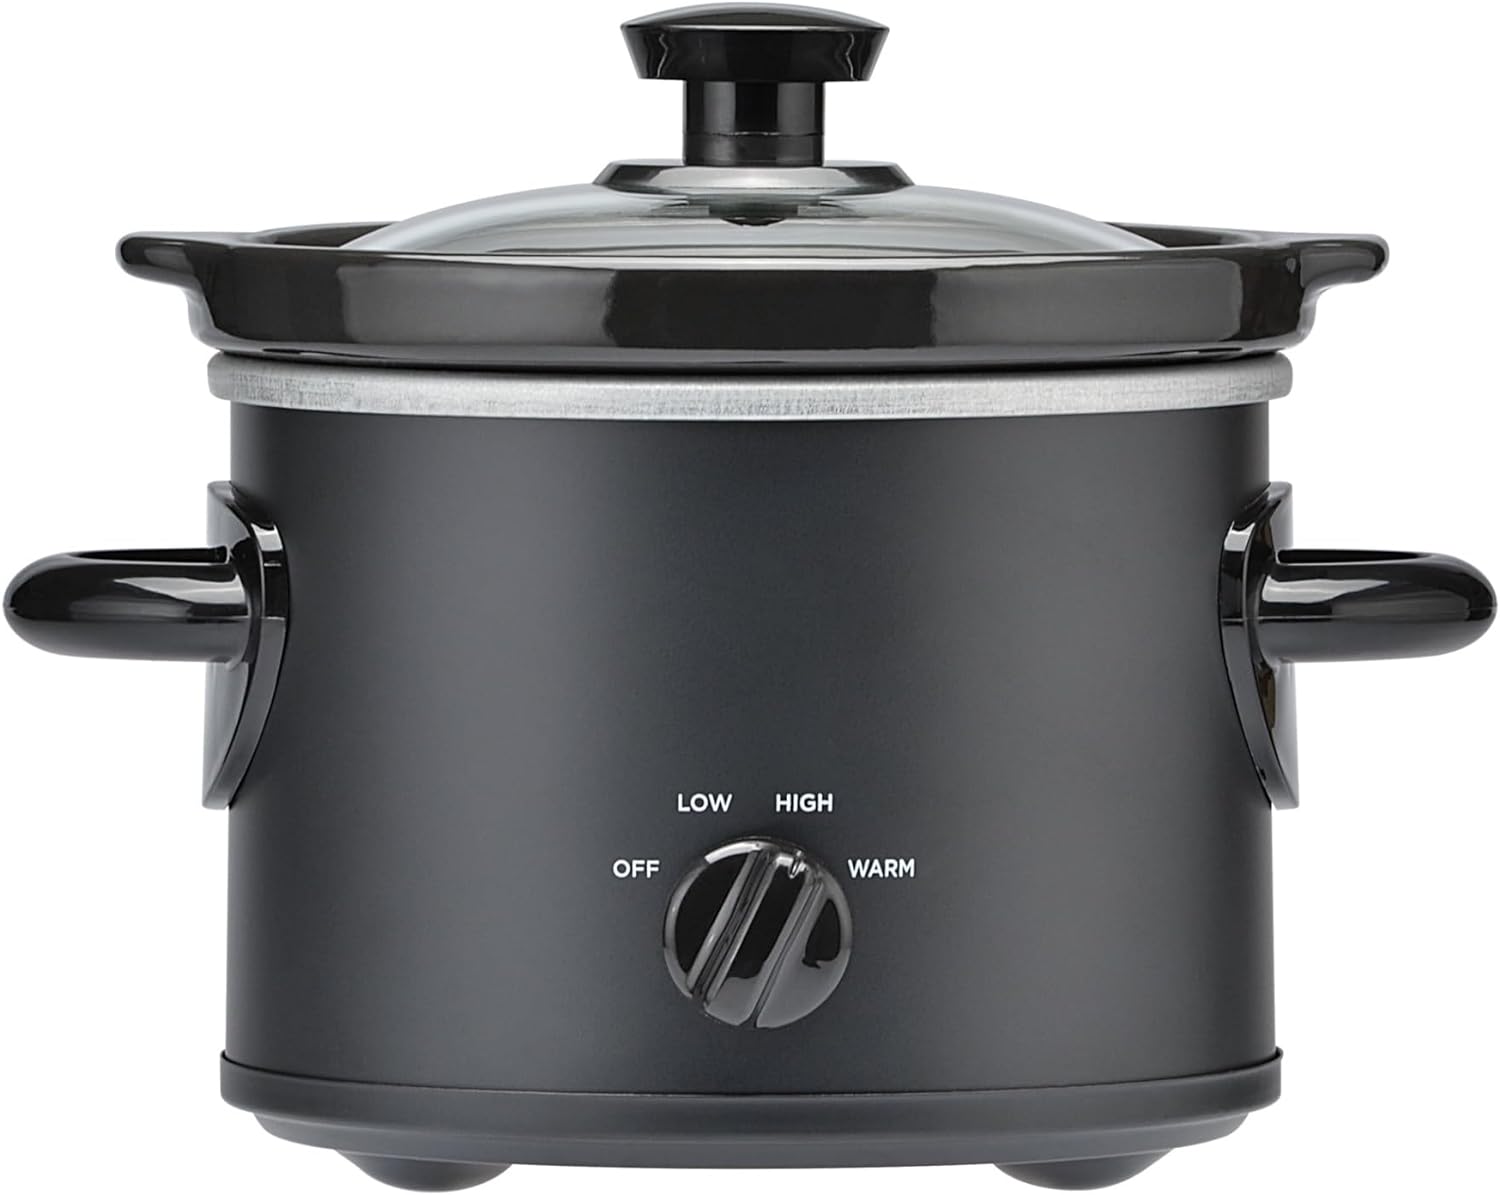 2 QT Slow Cooker in Matte Black - Effortlessly Cook Delicious Meals for Small Families